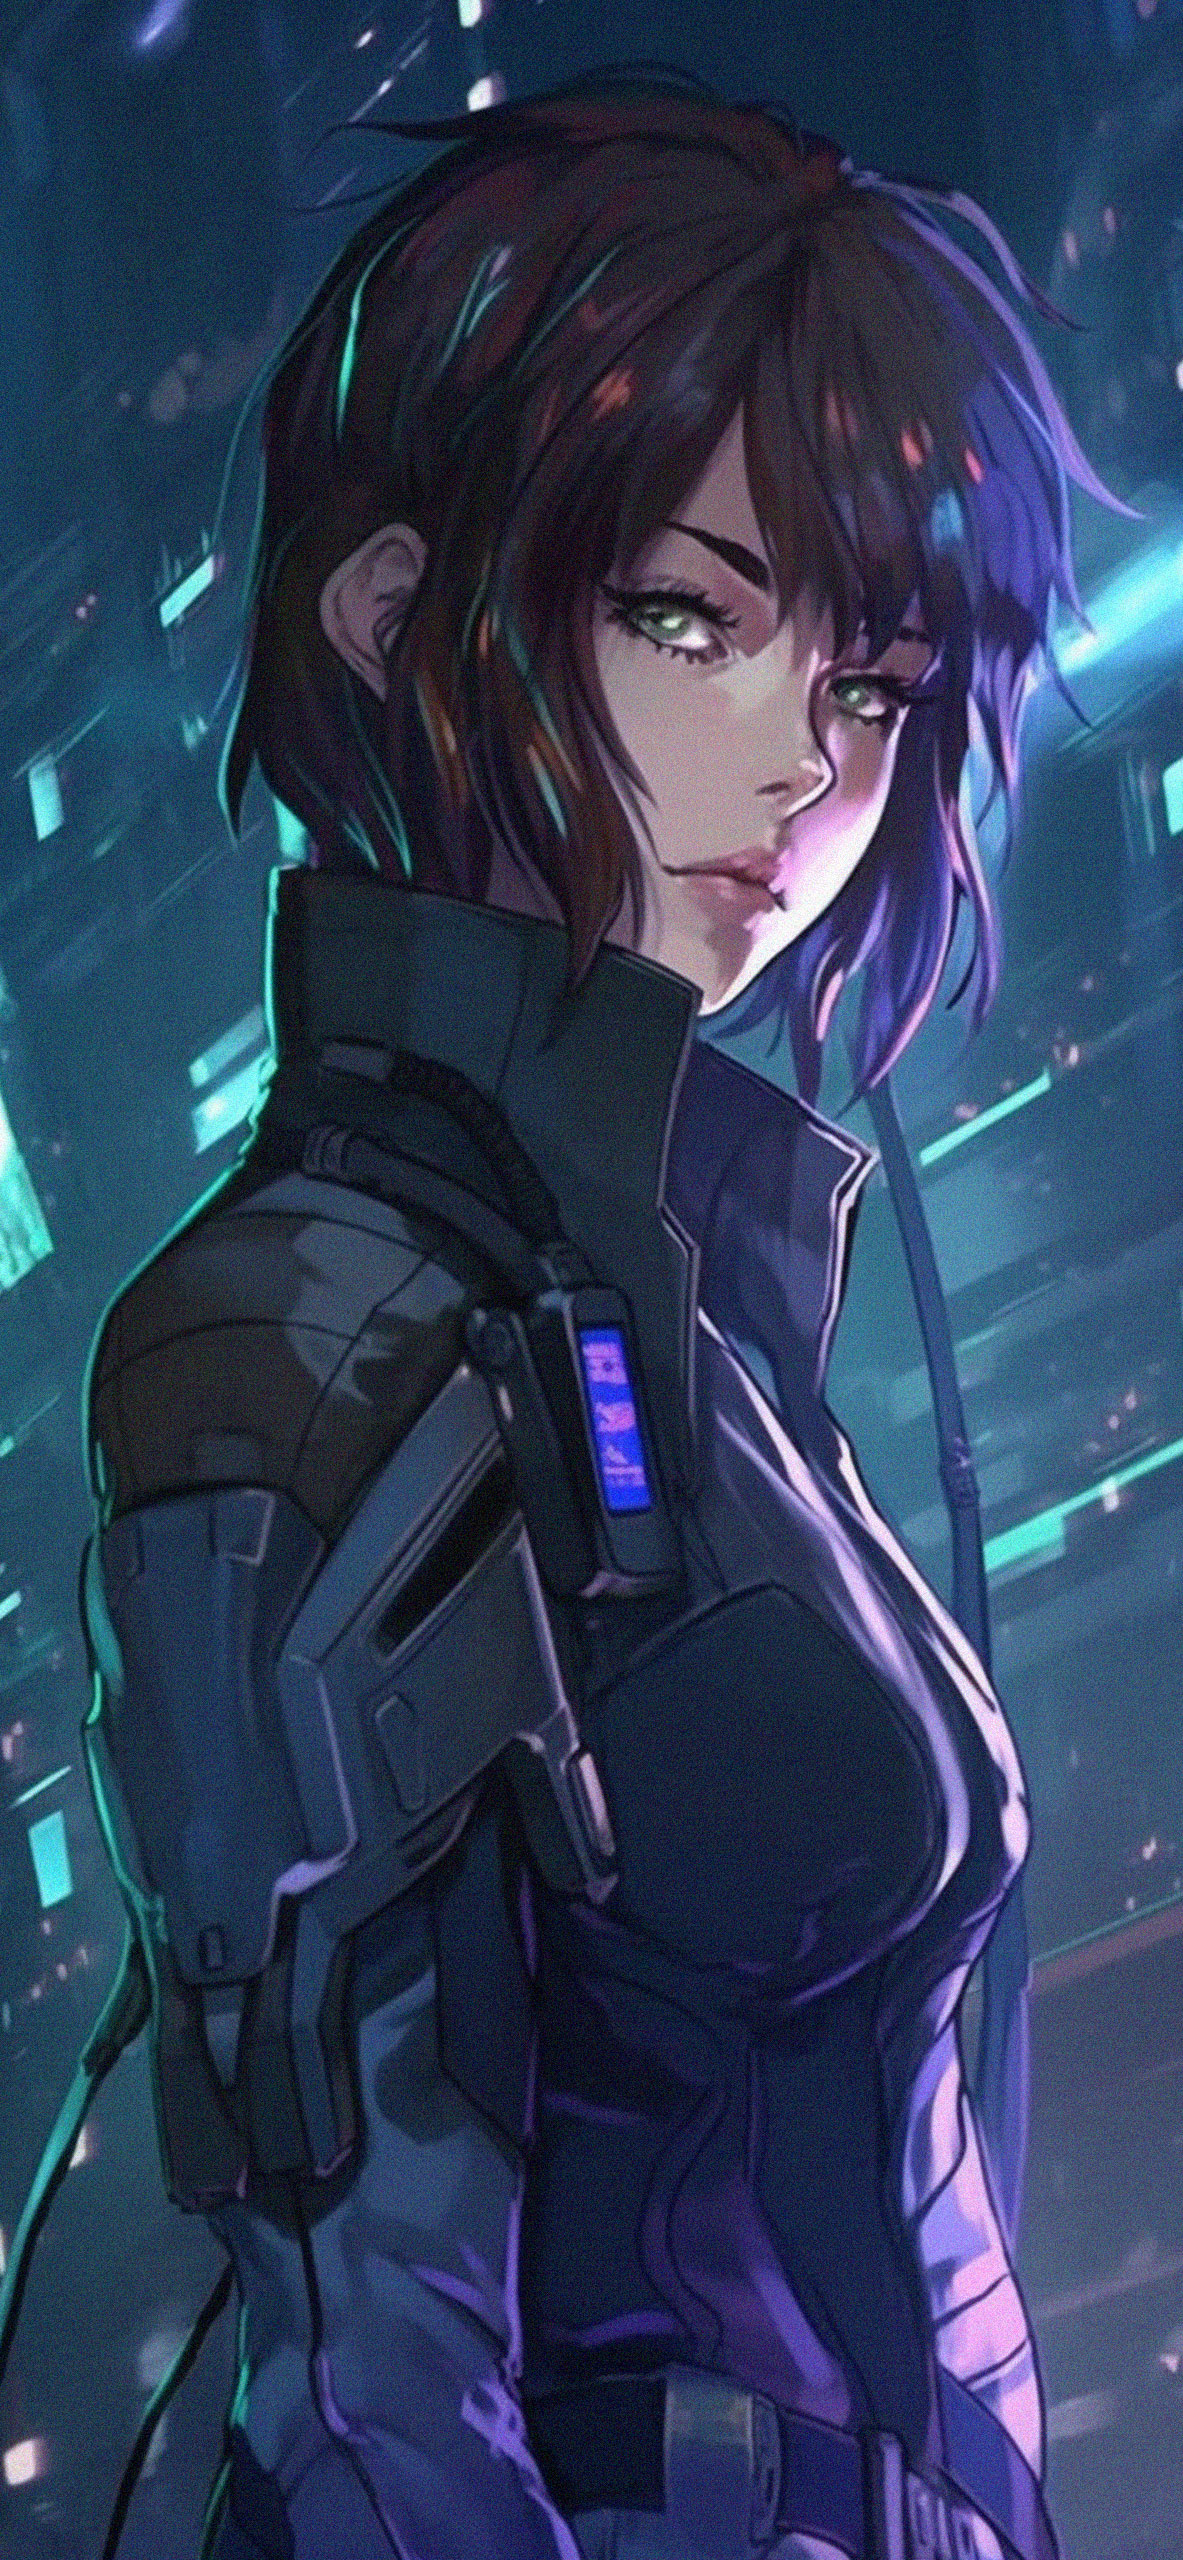 You Are Awesome - Ghost In The Shell : Motoko Kusanagi Premium Anime Series  Poster 04 (12inchx18inch) : Amazon.in: Home & Kitchen